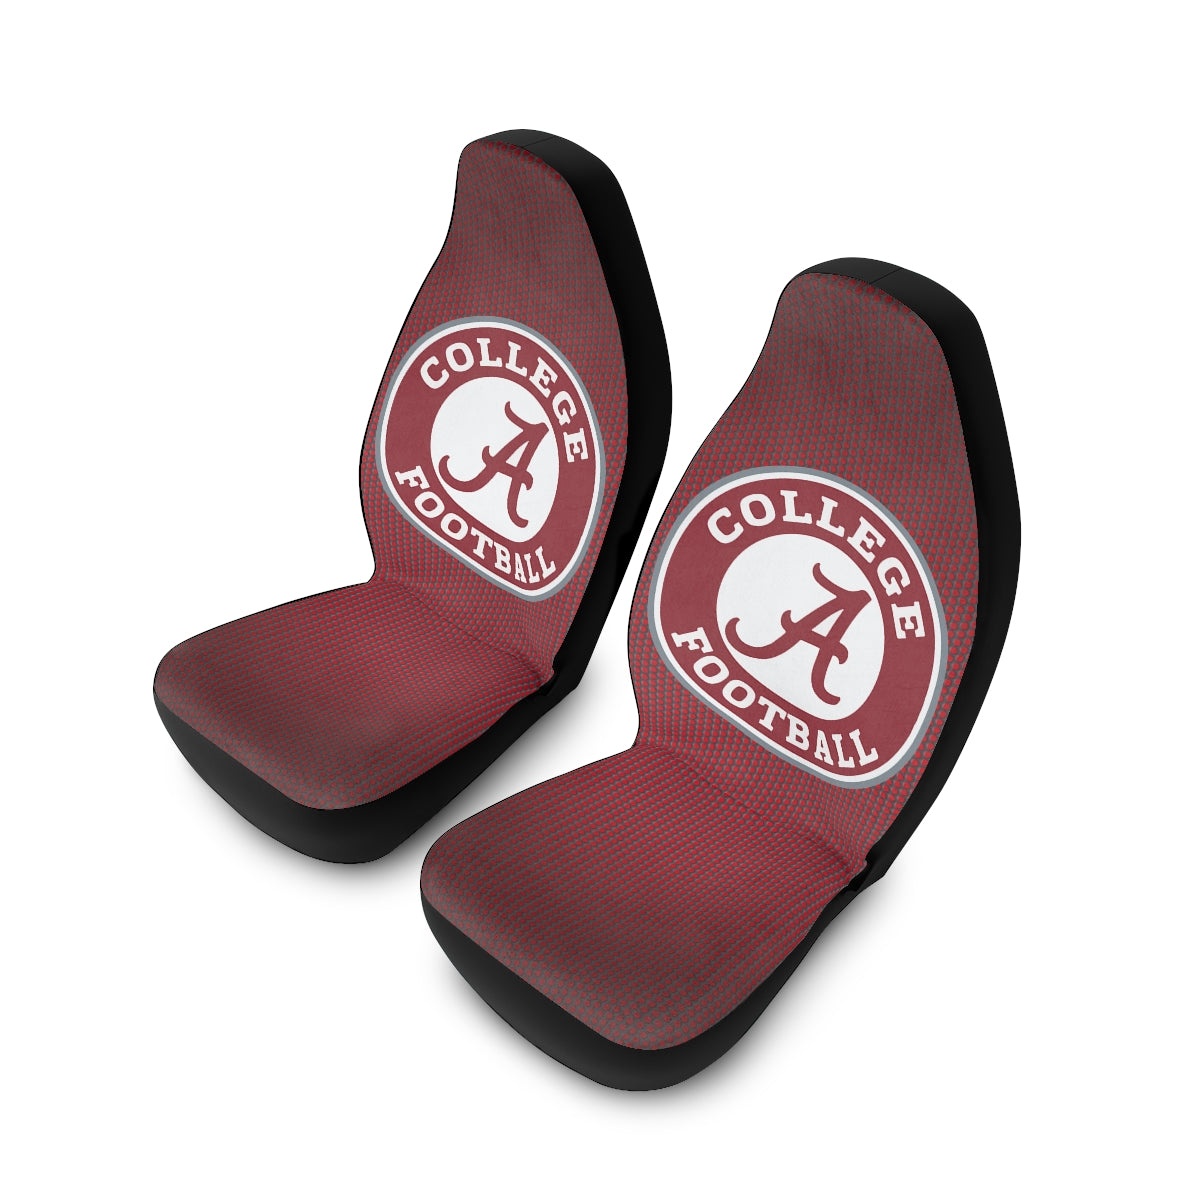 Alabama (4) Polyester Car Seat Covers